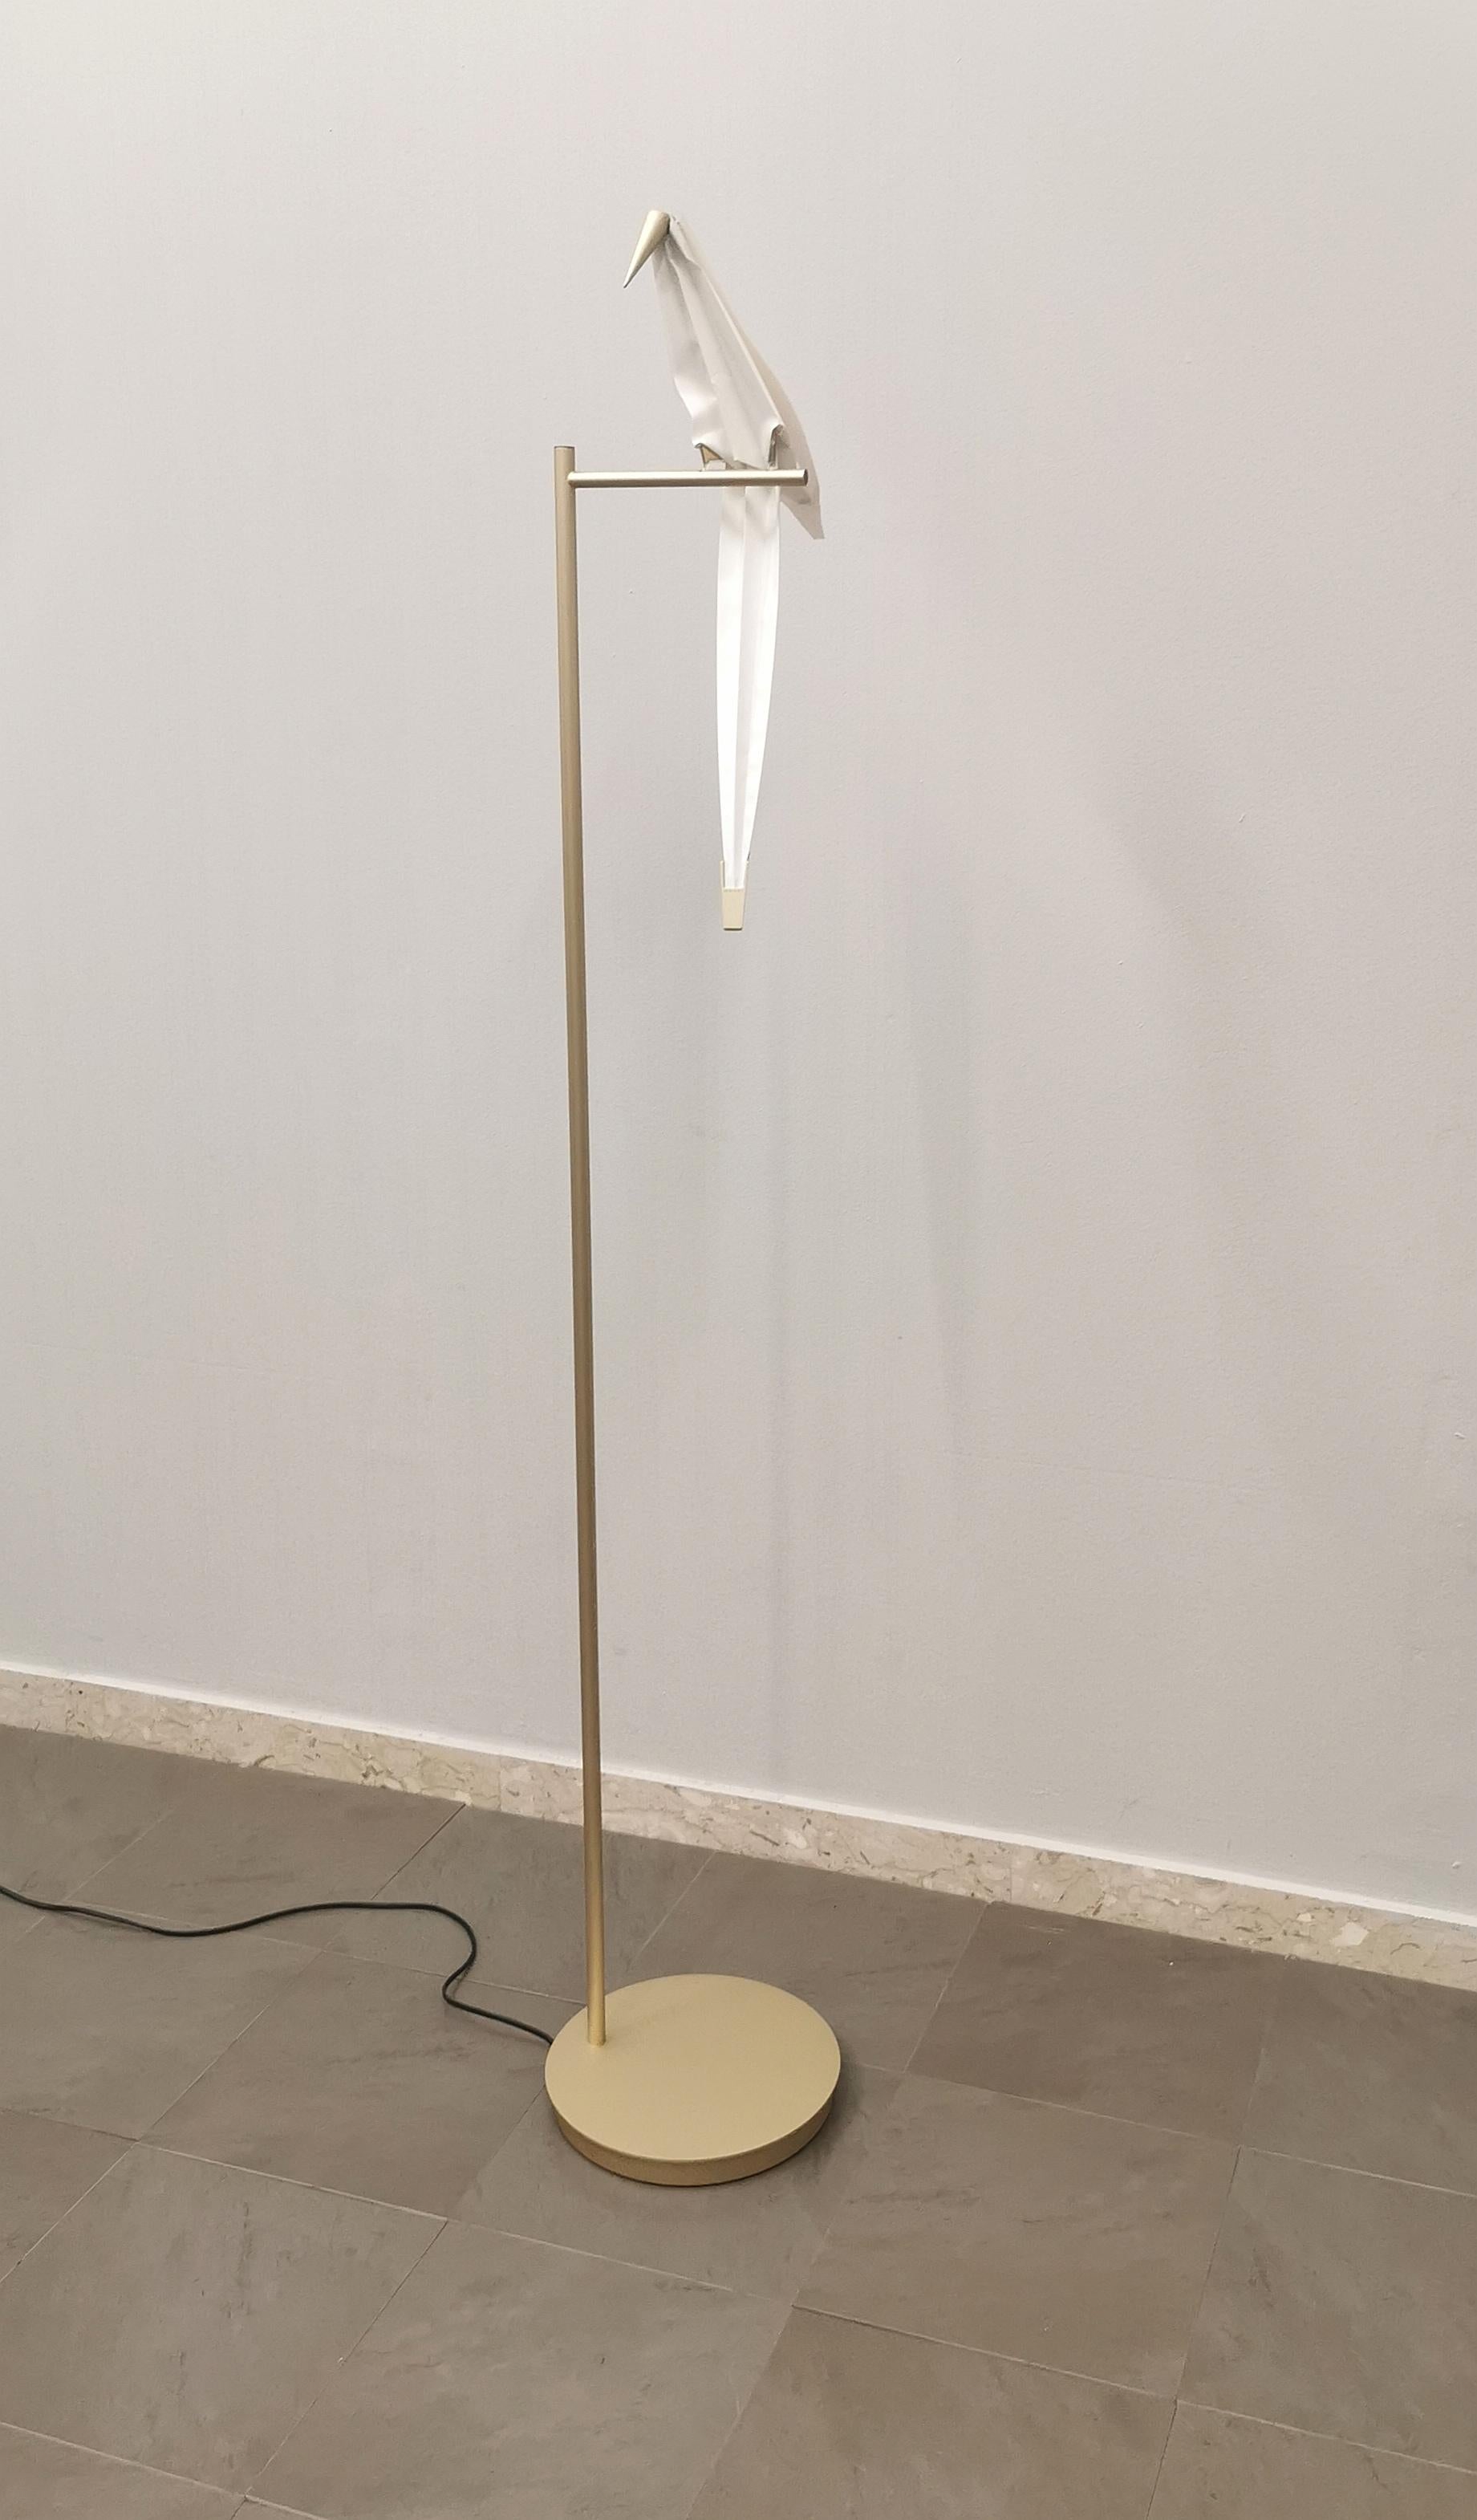 Floor lamp designed by designer Umut Yamac and produced in Holland by the modern design company Moooi between the early and mid-2000s. The lamp has a circular base with a golden metal stem that support a synthetic paper diffuser representing a